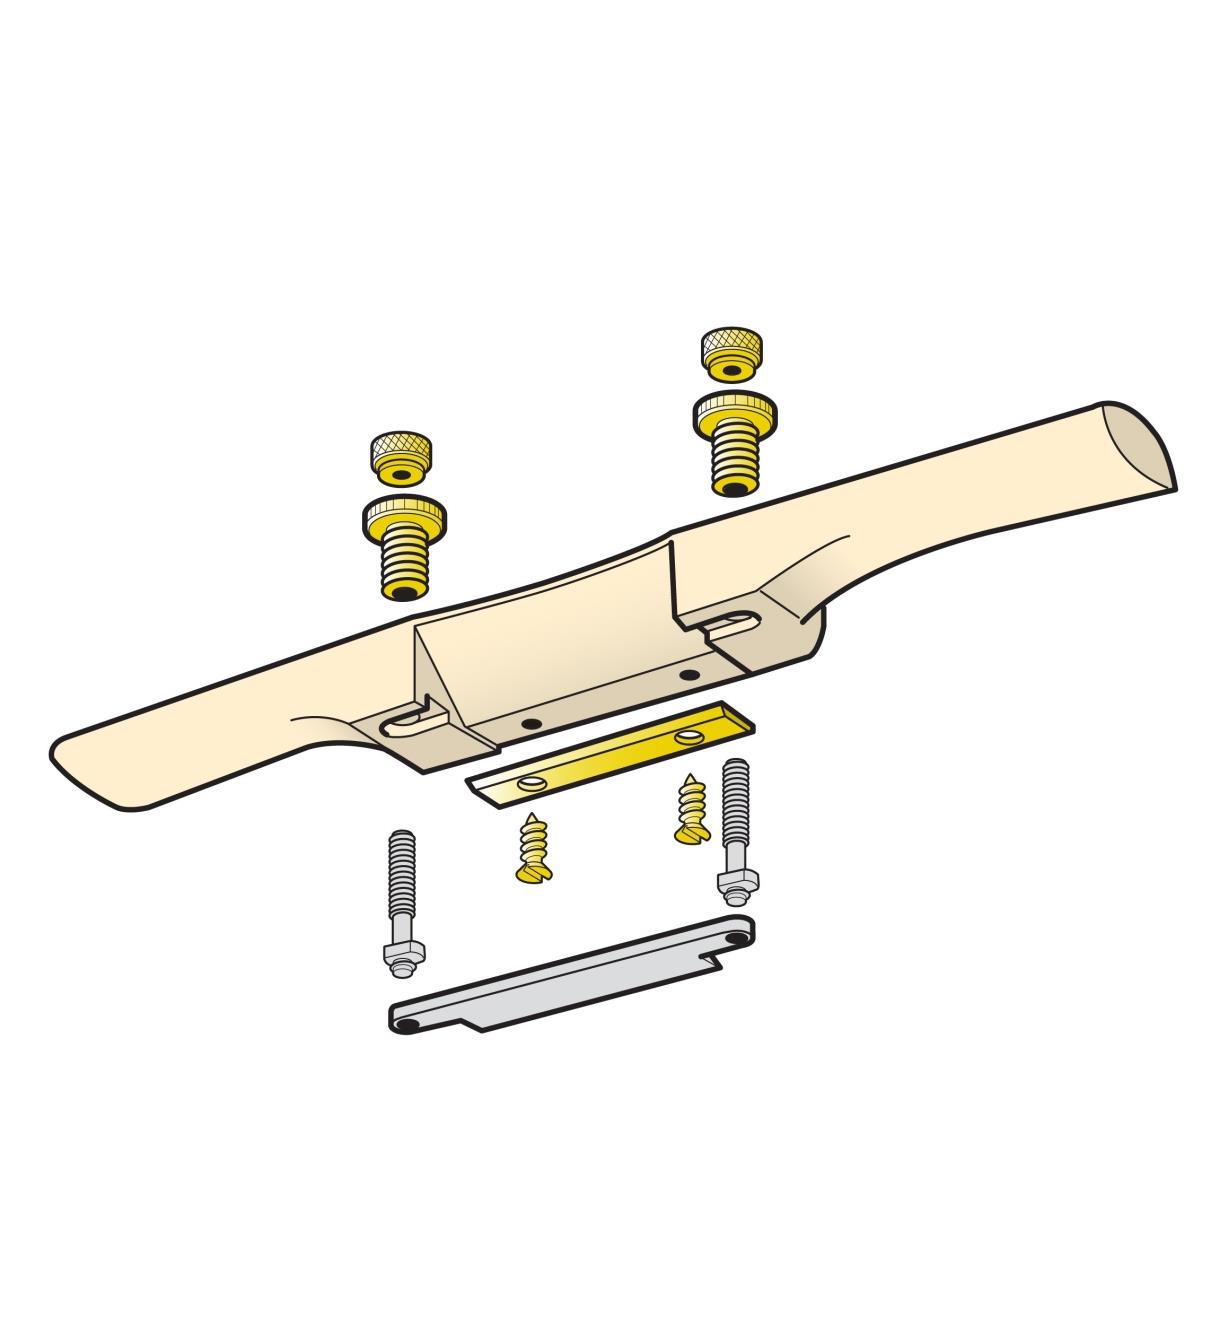 Exploded illustration of how the spokeshave is assembled 